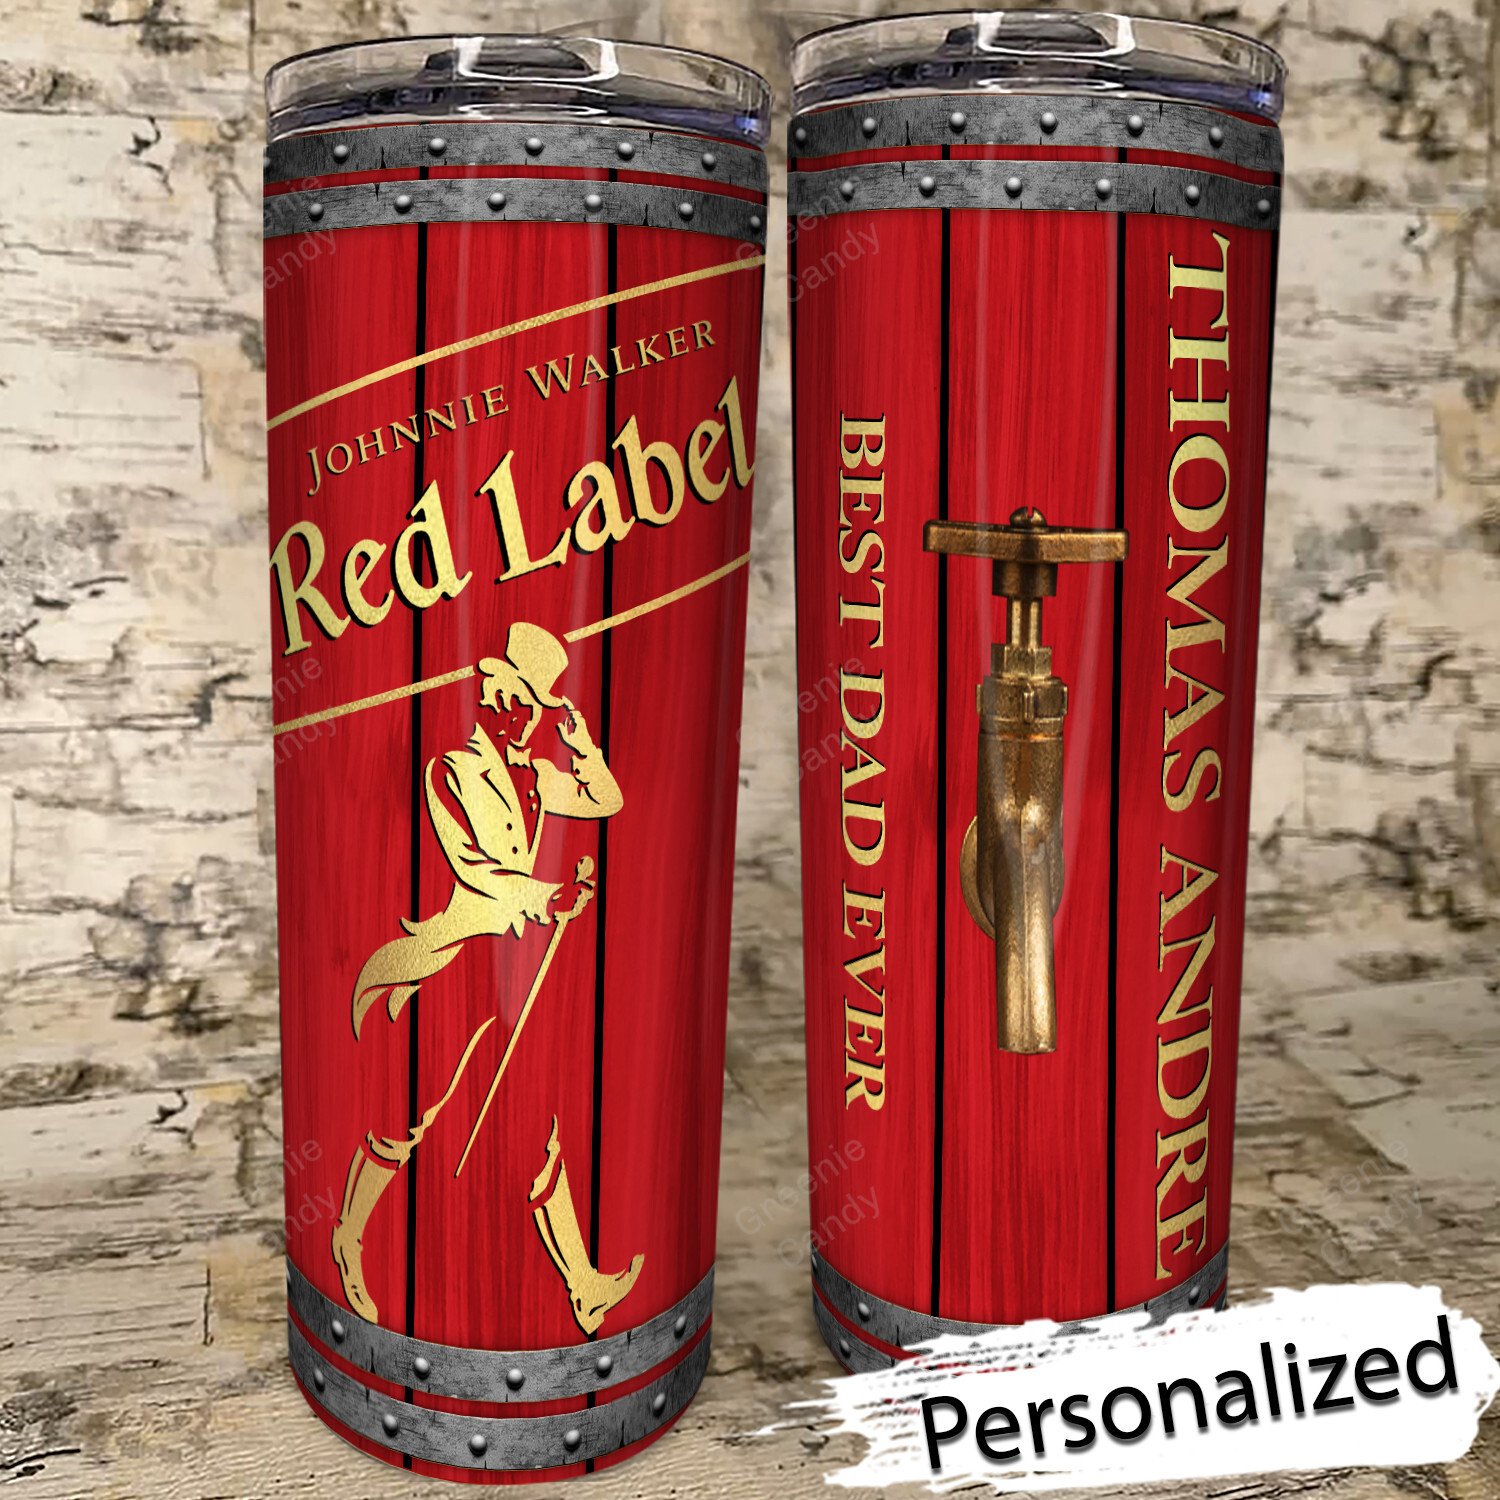 Personalized_Johnnie_Walker_Red_Label_Whiskey_Skinny_Tumbler